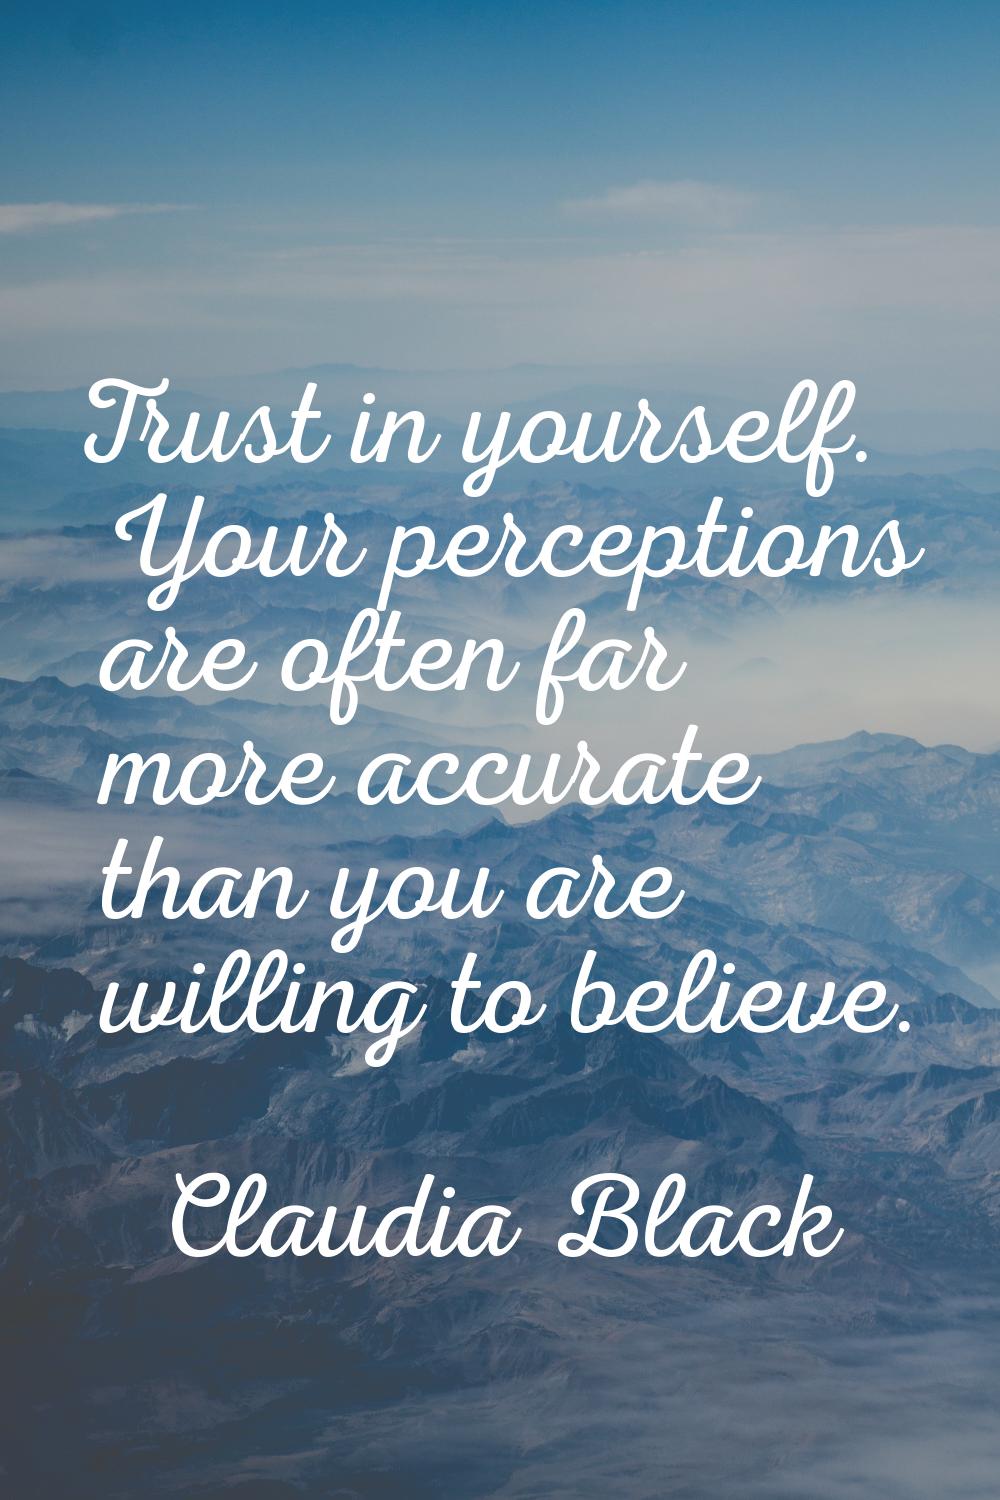 Trust in yourself. Your perceptions are often far more accurate than you are willing to believe.